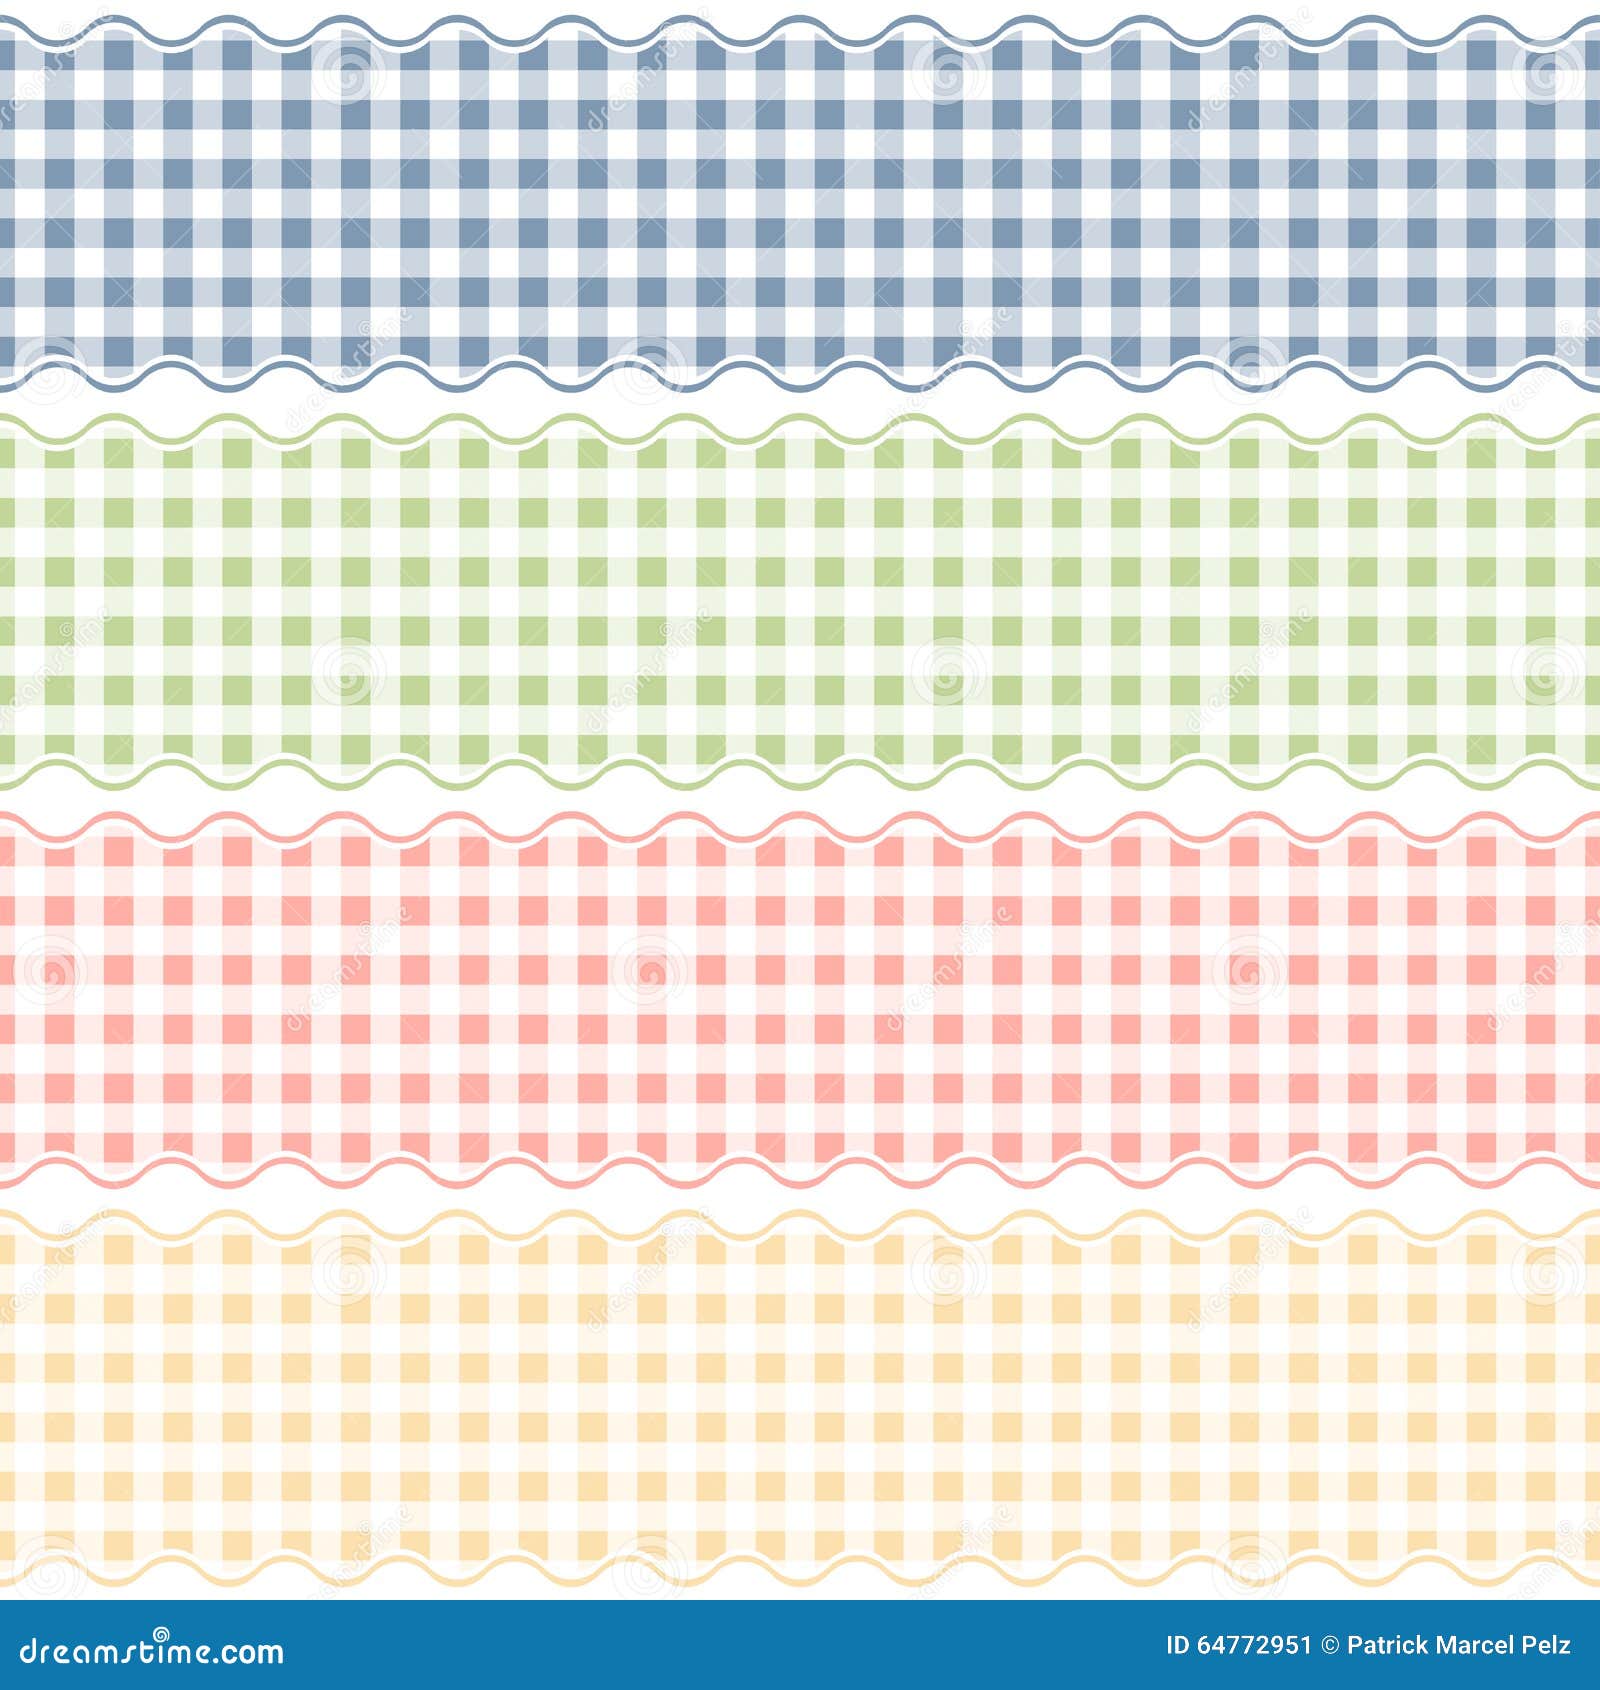 seamless-checkered-banners-stock-vector-illustration-of-blue-64772951